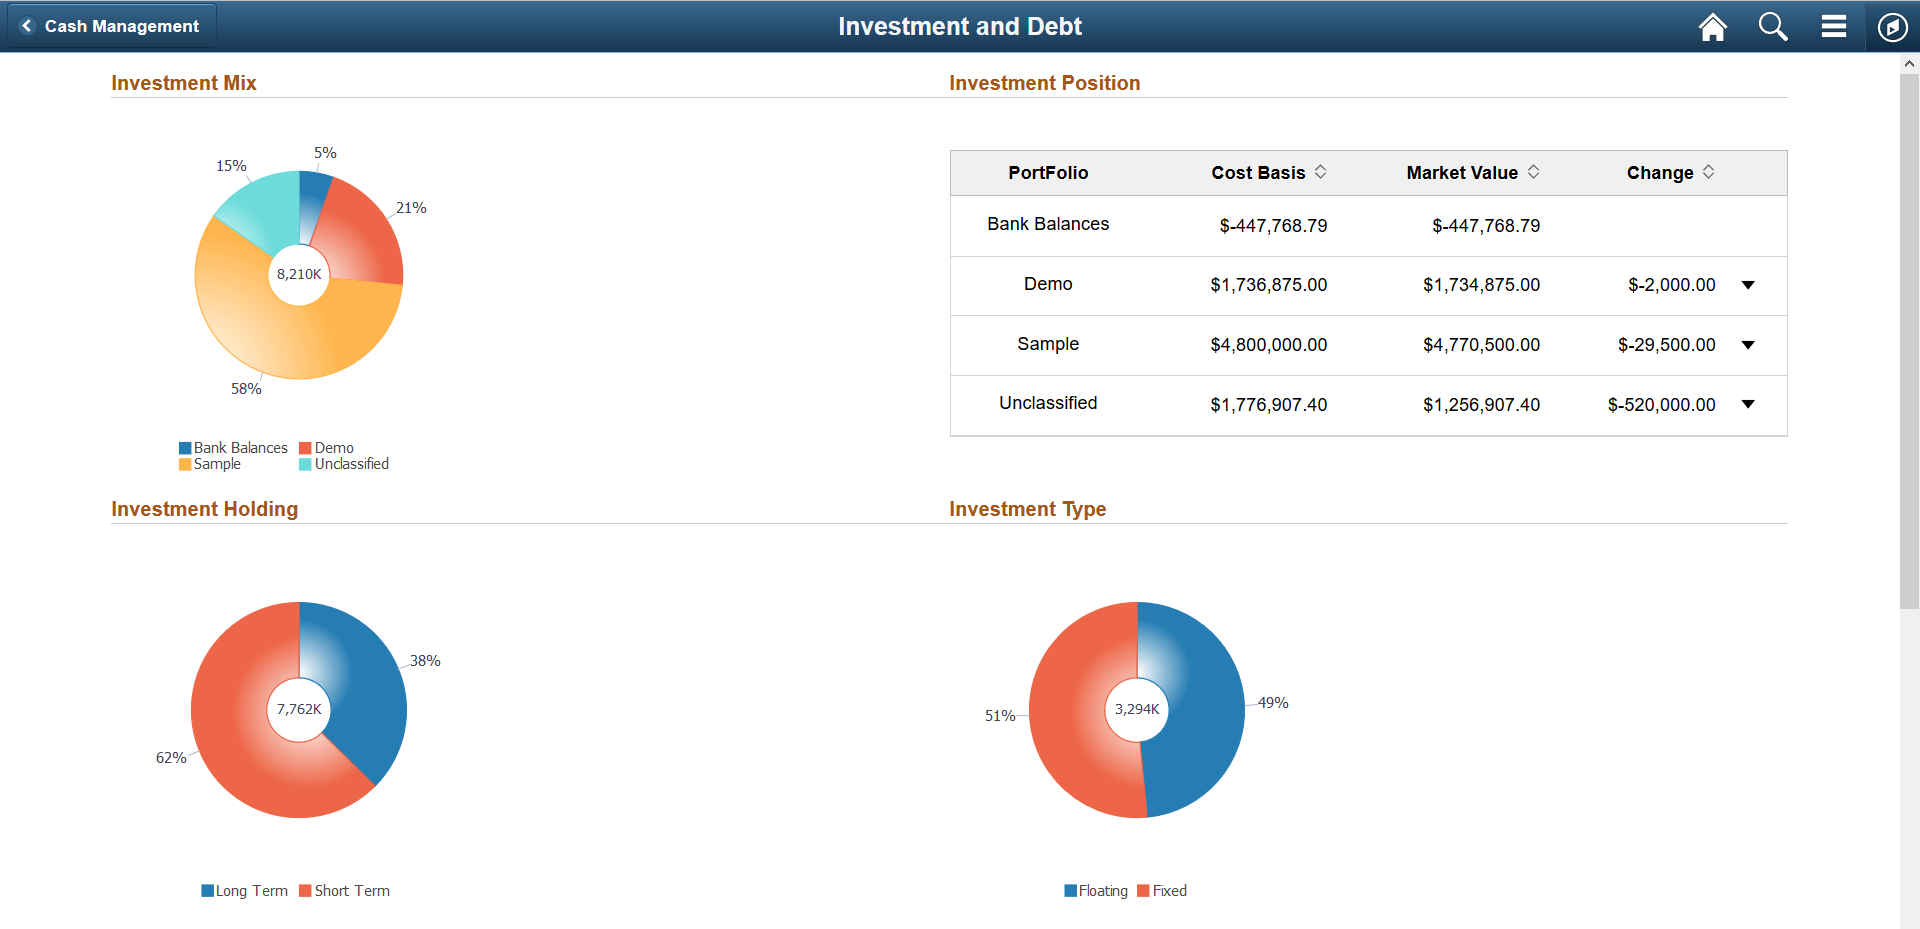 Fluid Investment and Debt page (1 of 2)